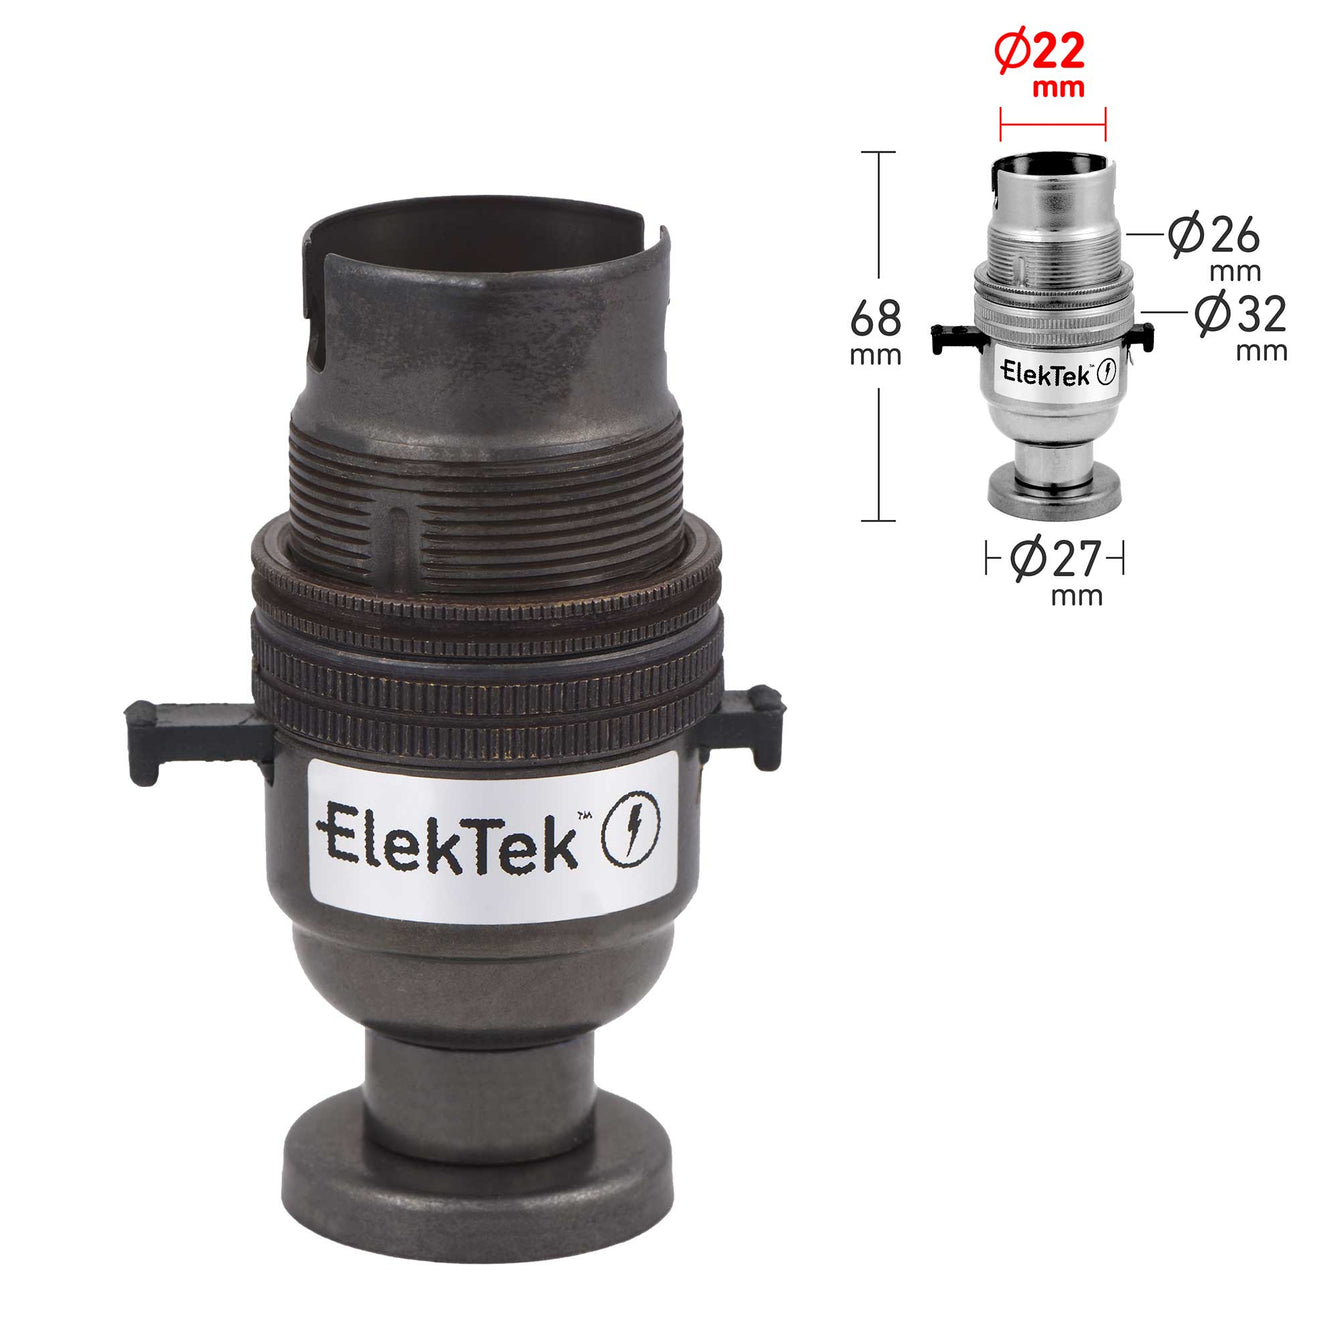 ElekTek Safety Switch Lamp Holder Half Inch Bayonet Cap B22 With Shade Ring Back Plate Cover and Screws Brass 